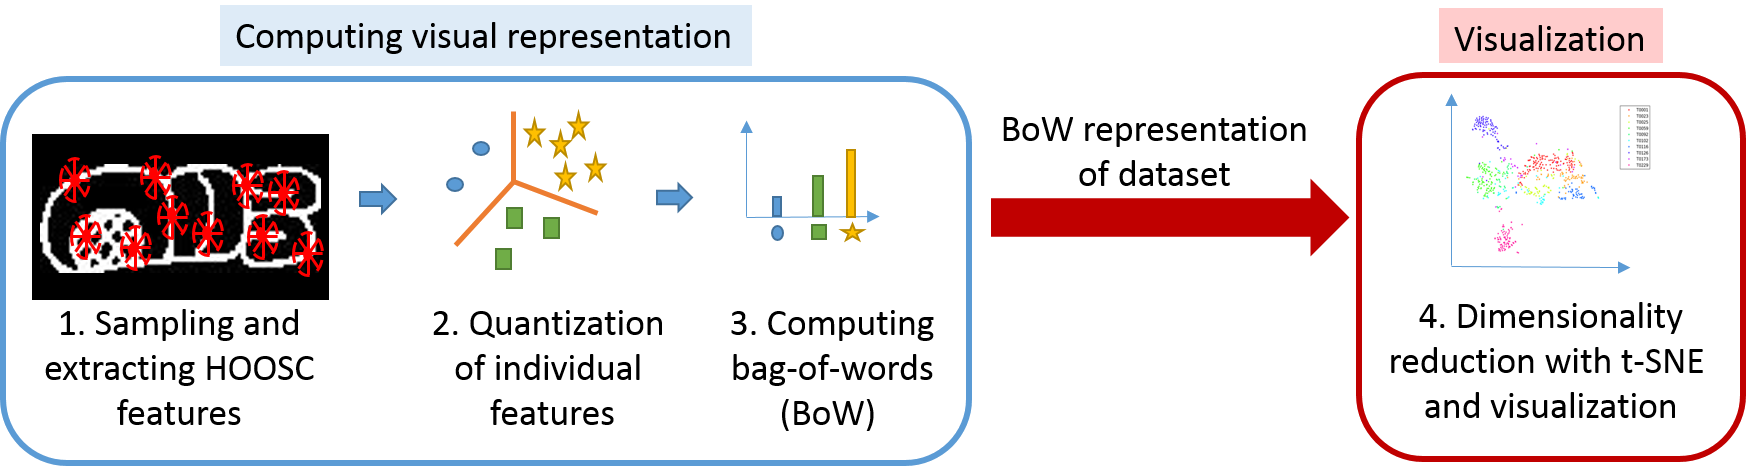 Figure 3. Overall flow for visualization with t-SNE